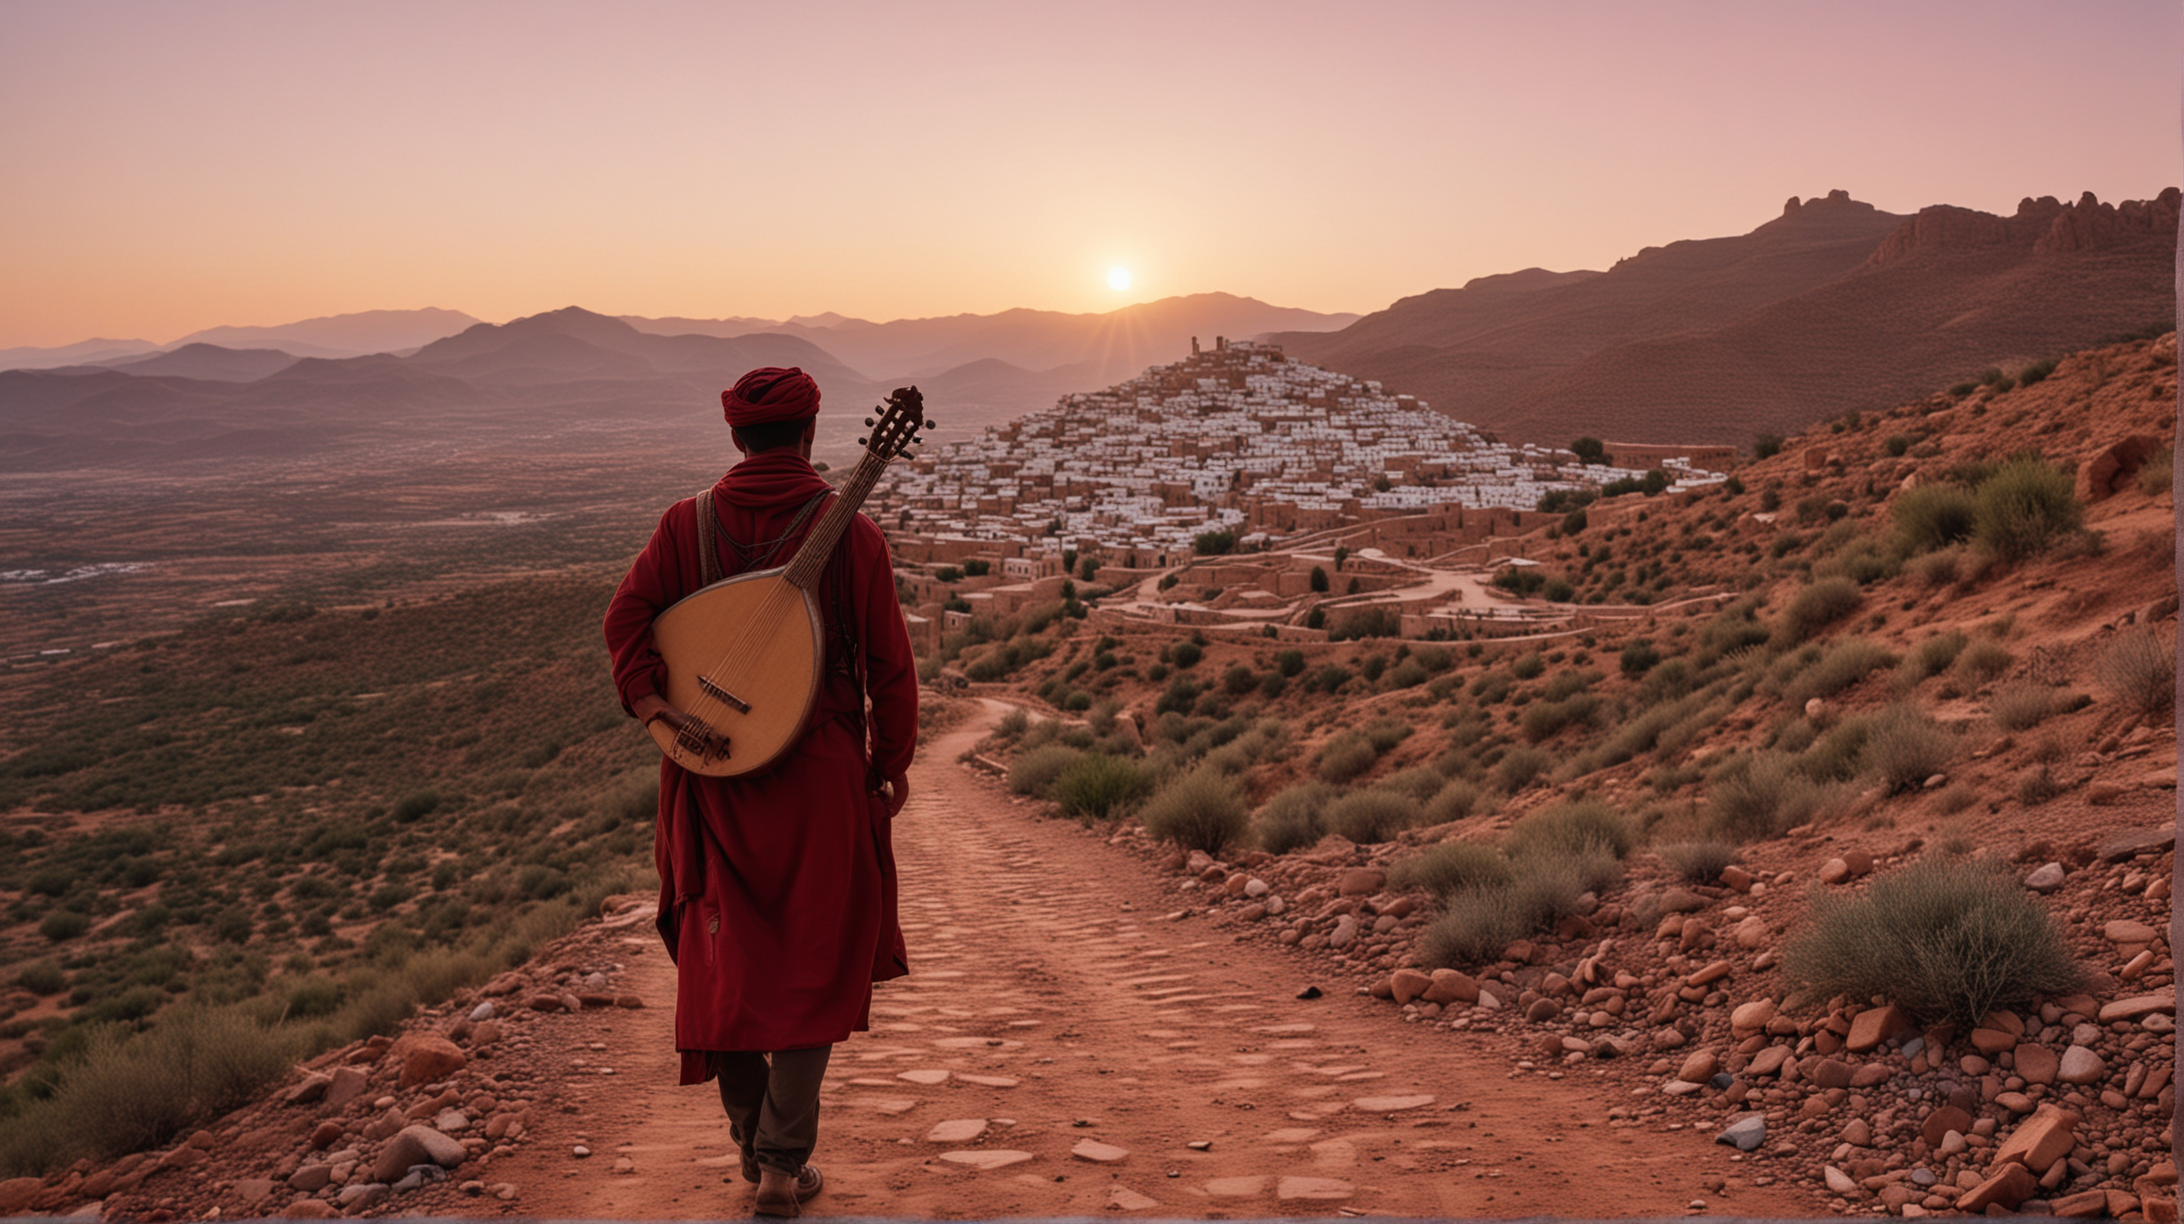 lonely Moroccan musician, his lute on his shoulders, walking on a mountain path towards a traditional Moroccan village, red sunset, cinematic, wide angle